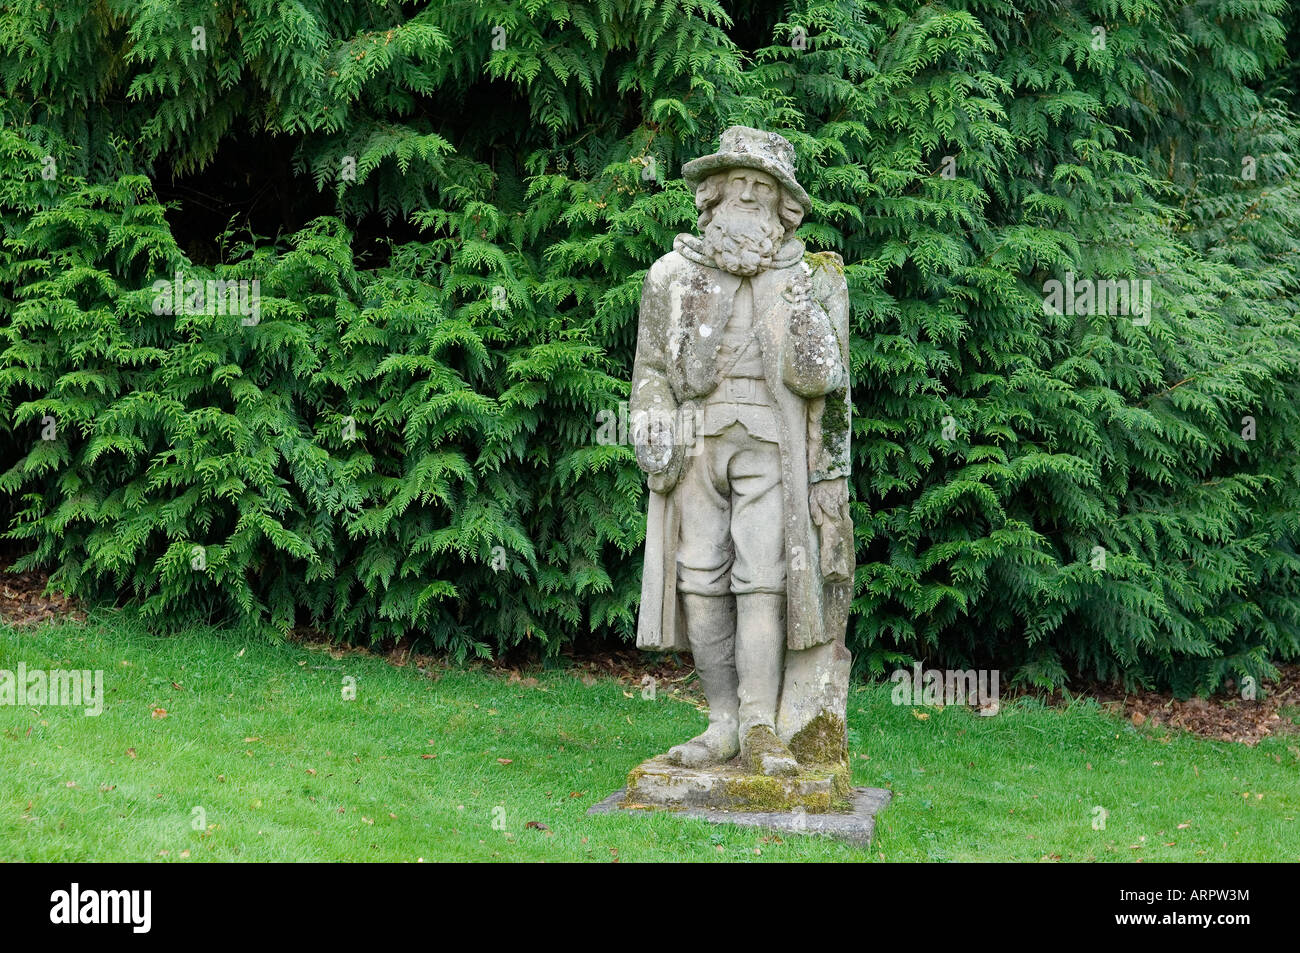 Statues at Abbotsford, Sir Walter Scott’s home near Galashiels, Scotland, are characters from his writing. This is The Antiquary Stock Photo